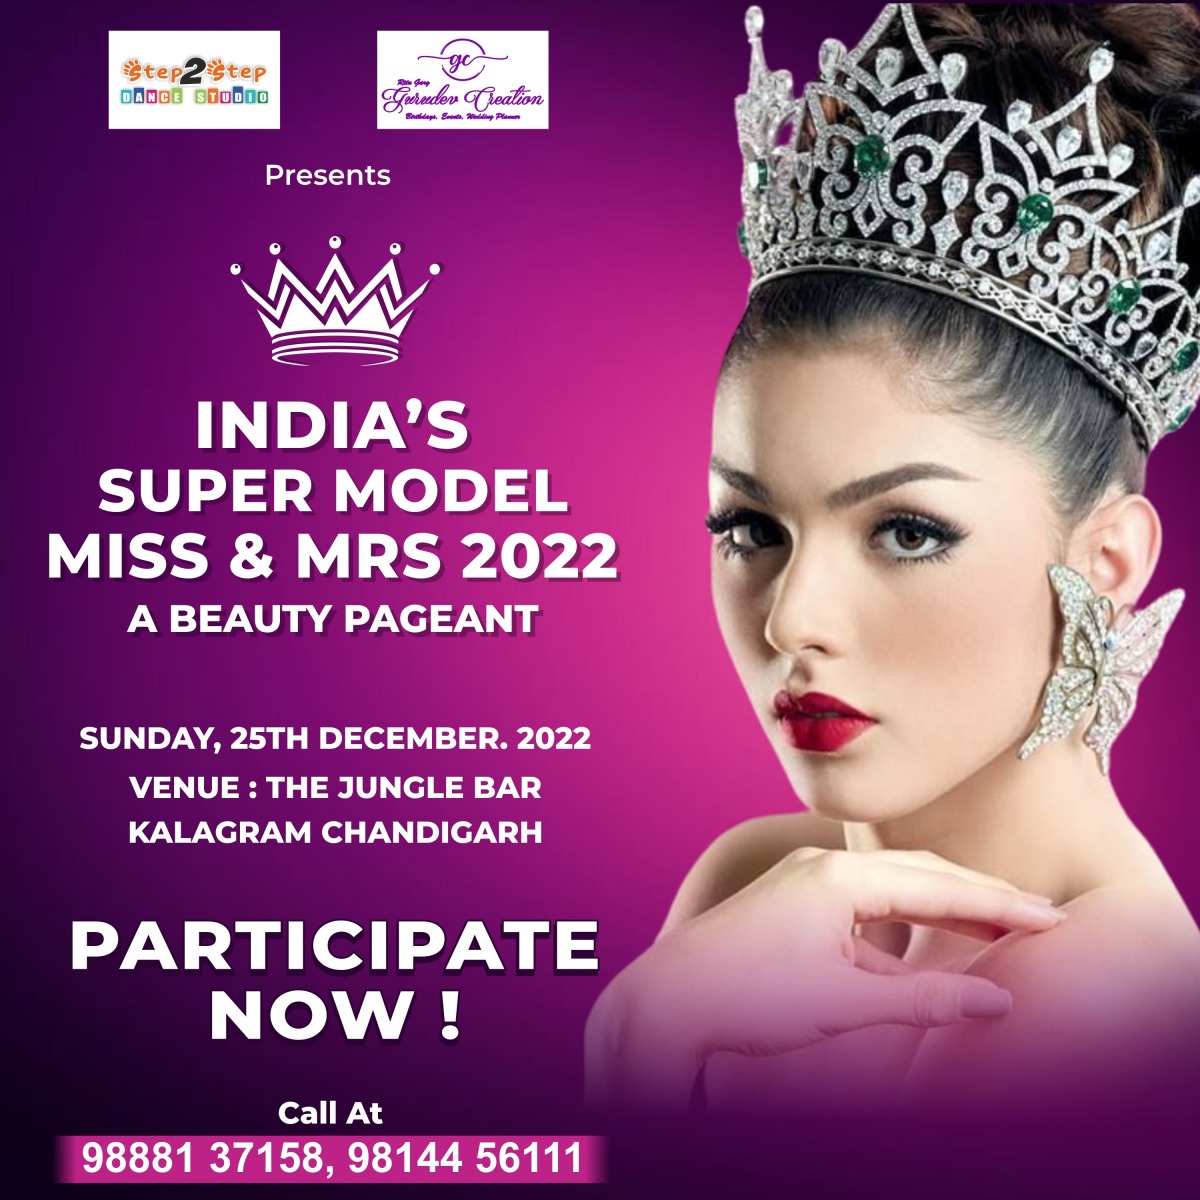 INDIA'S SUPER MODEL MISS & MRS 2022 A BEAUTY PAGEANT , INDIA'S SUPER MODEL MISS & MRS 2022 A BEAUTY PAGEANT